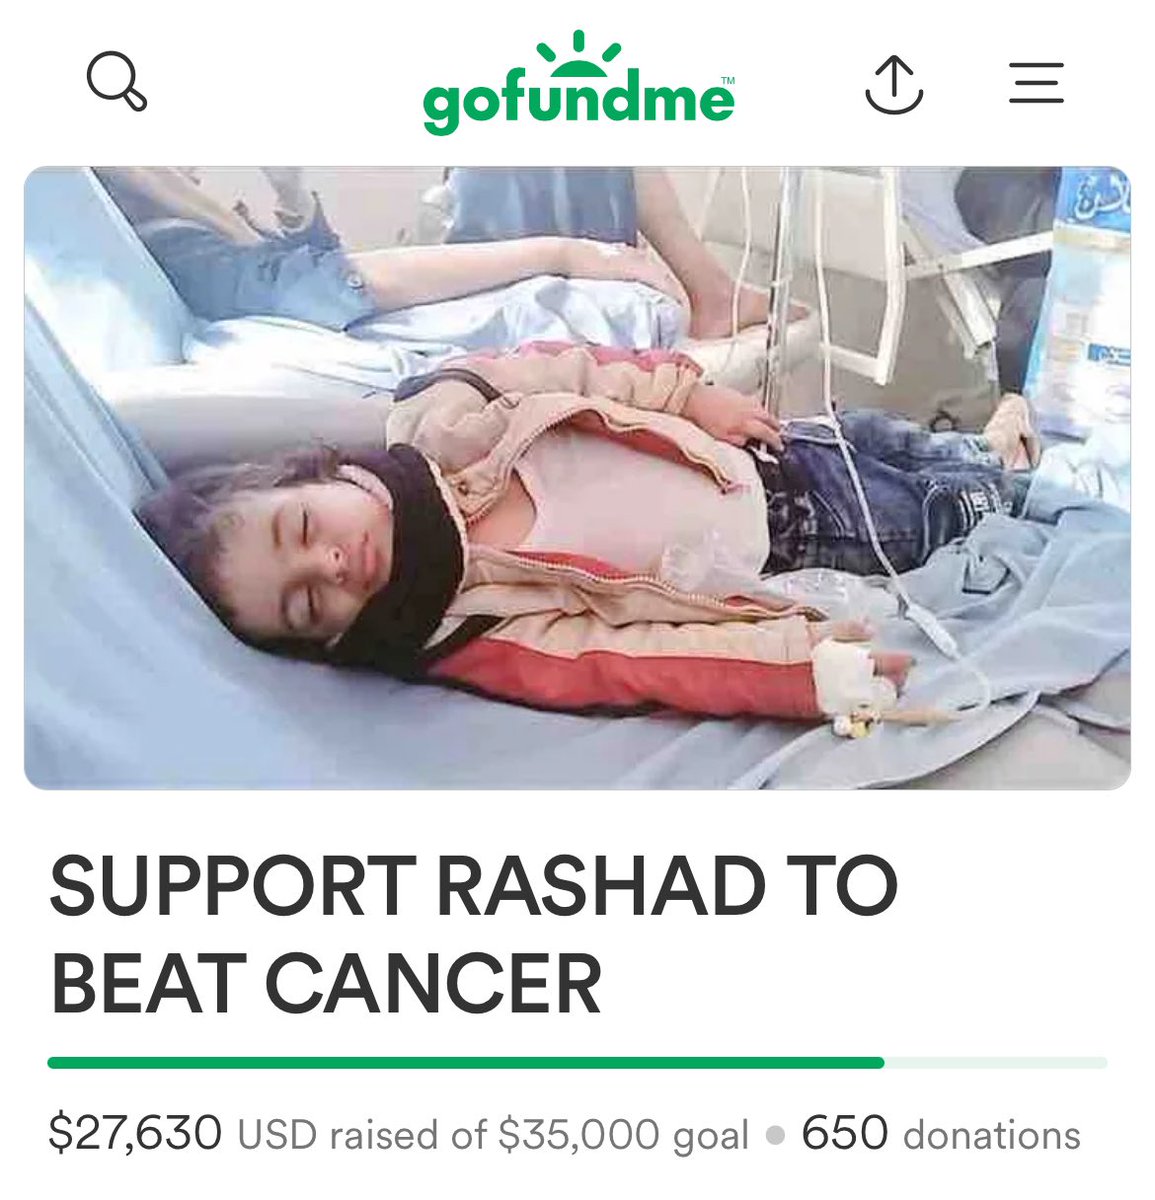 Please donate so that Rashad can afford proper surgery in order to remove lymph nodes from his abdomen and cover other medical expenses! They need to earn $35k by May 30th, and they are so close to getting it! gofund.me/29757c16